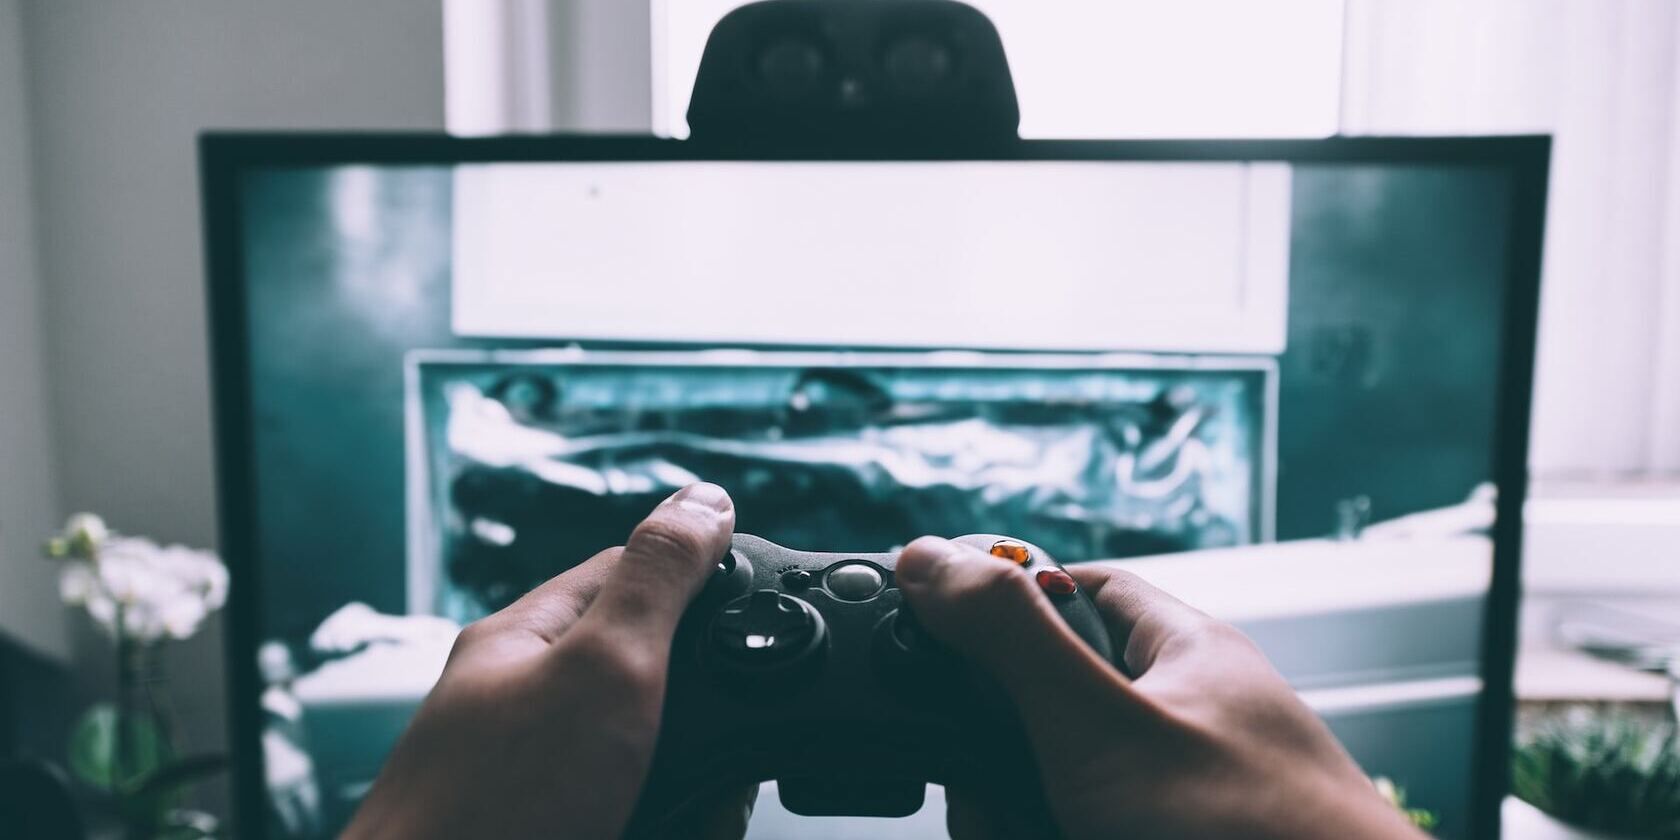 Man holding a game controller in front of a monitor screen